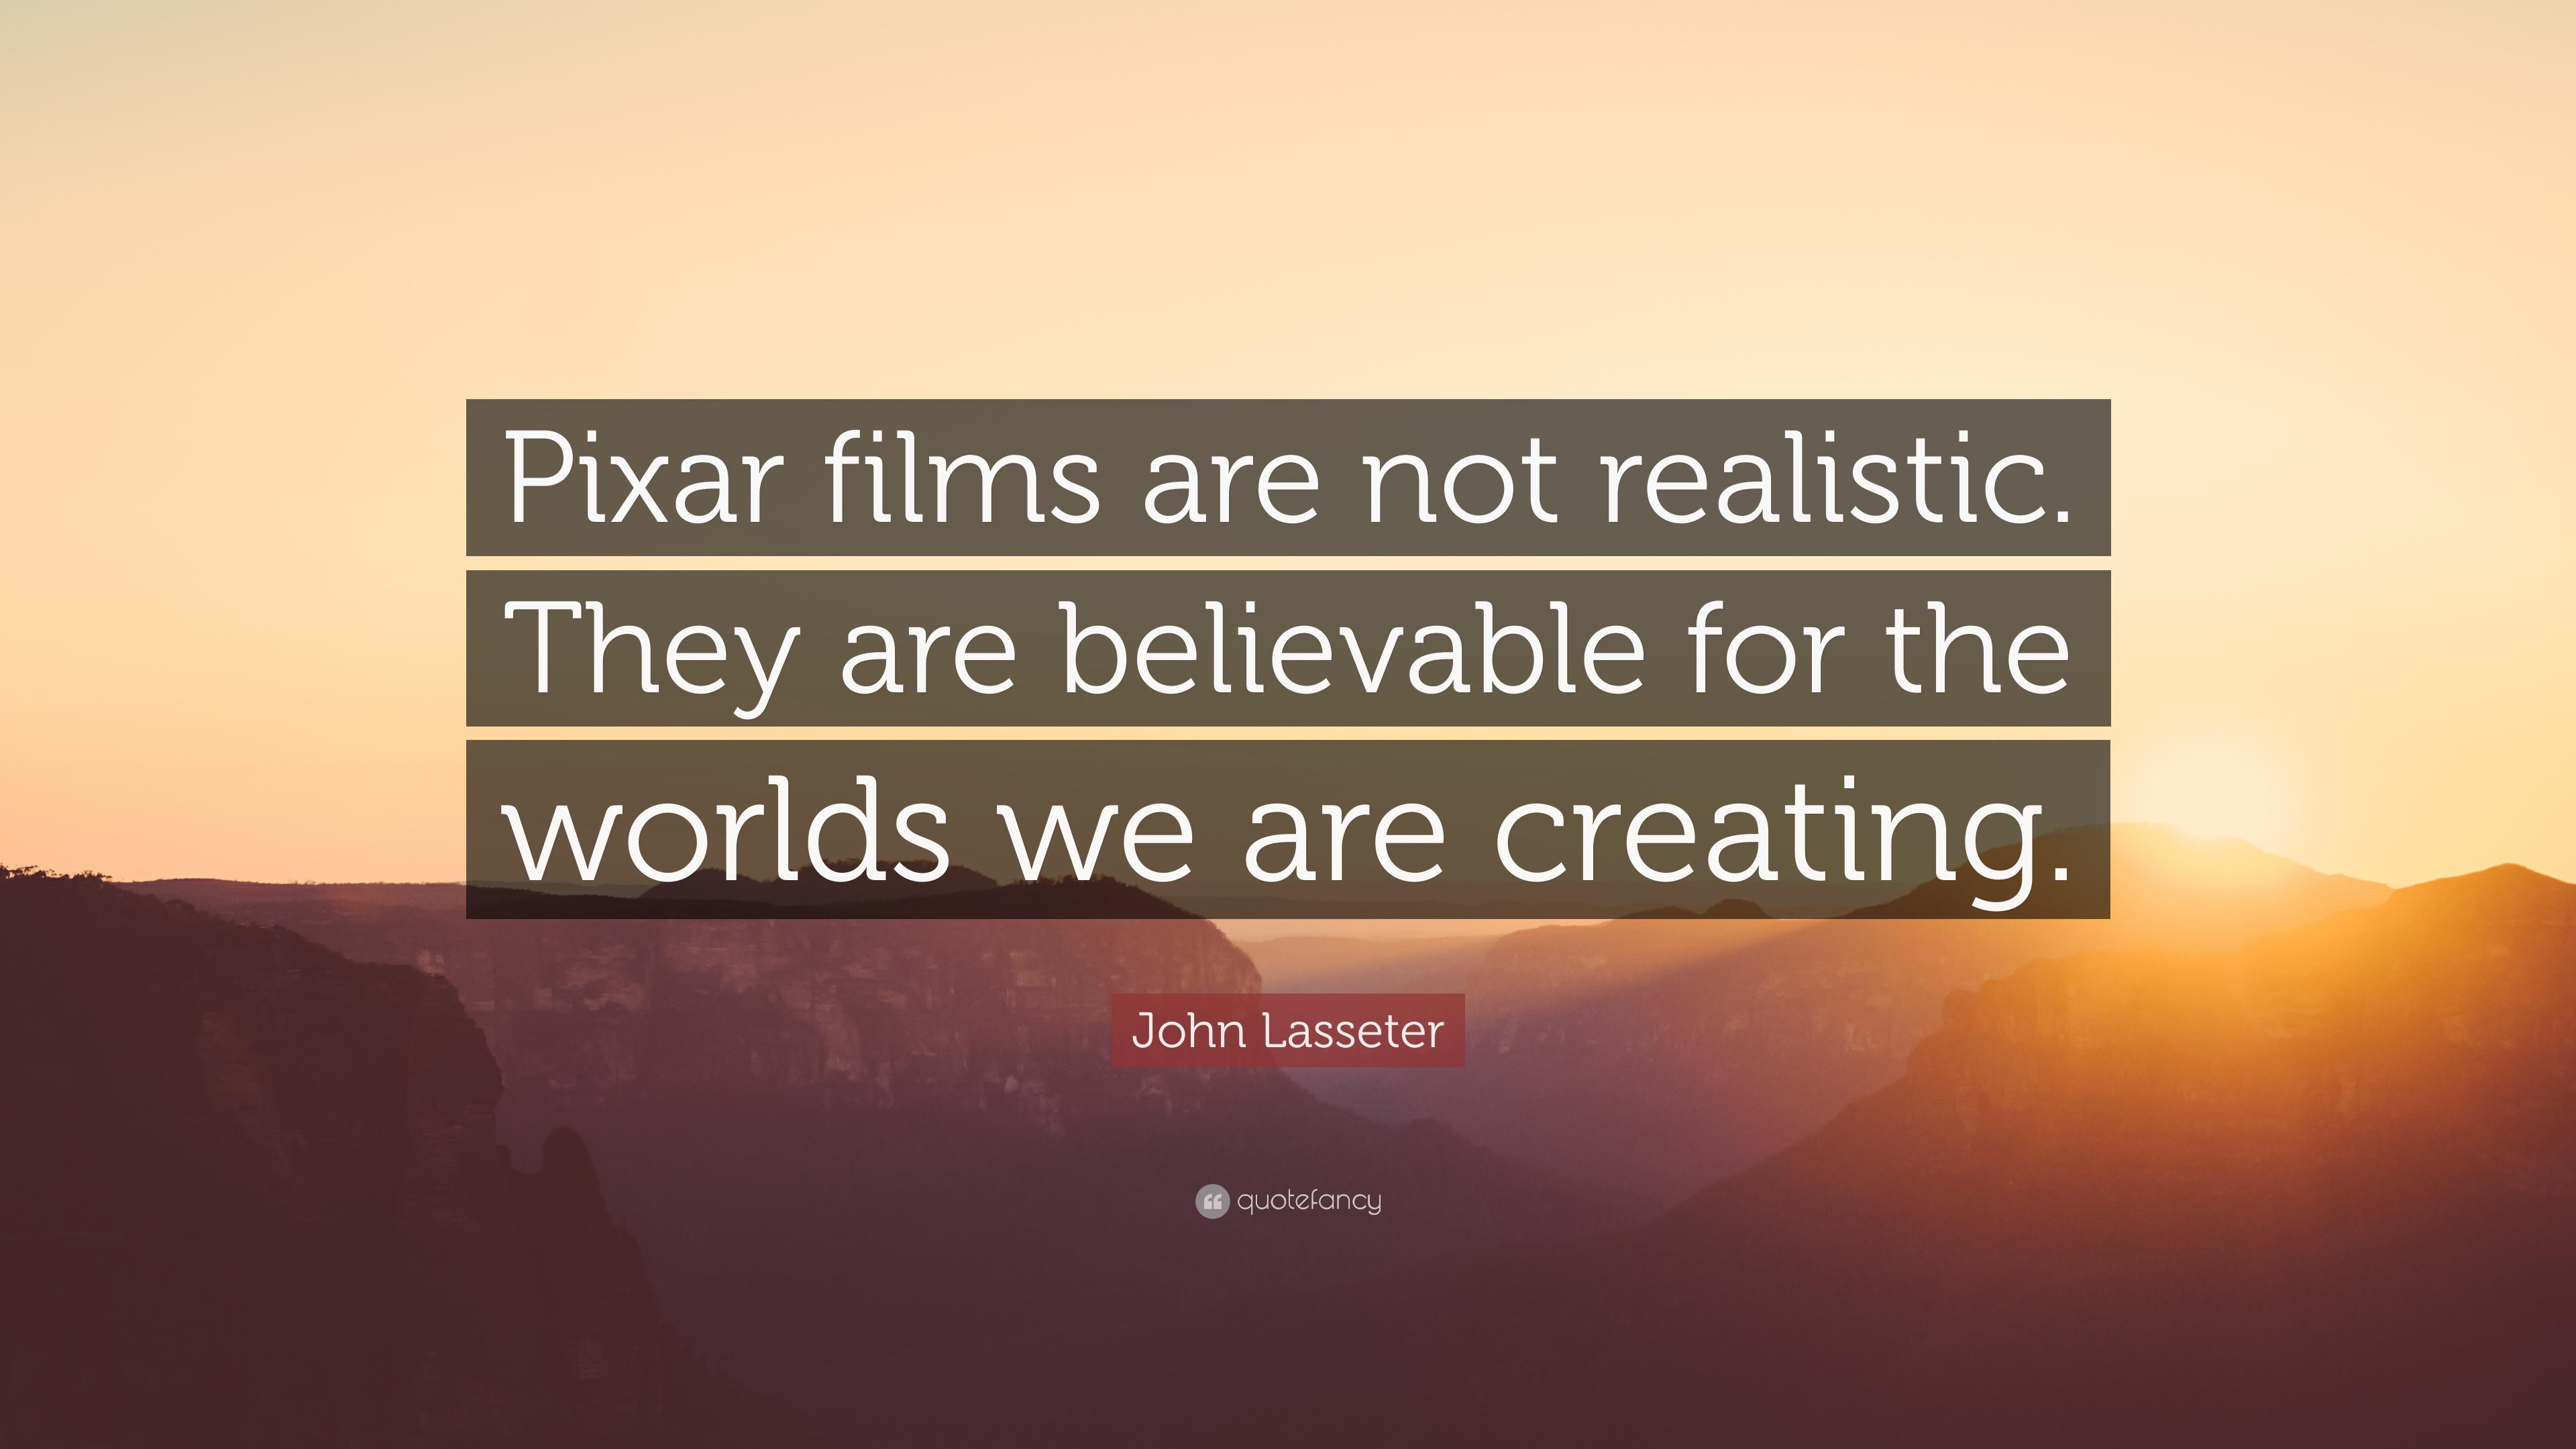 John Lasseter Quote: “Pixar films are not realistic. They are